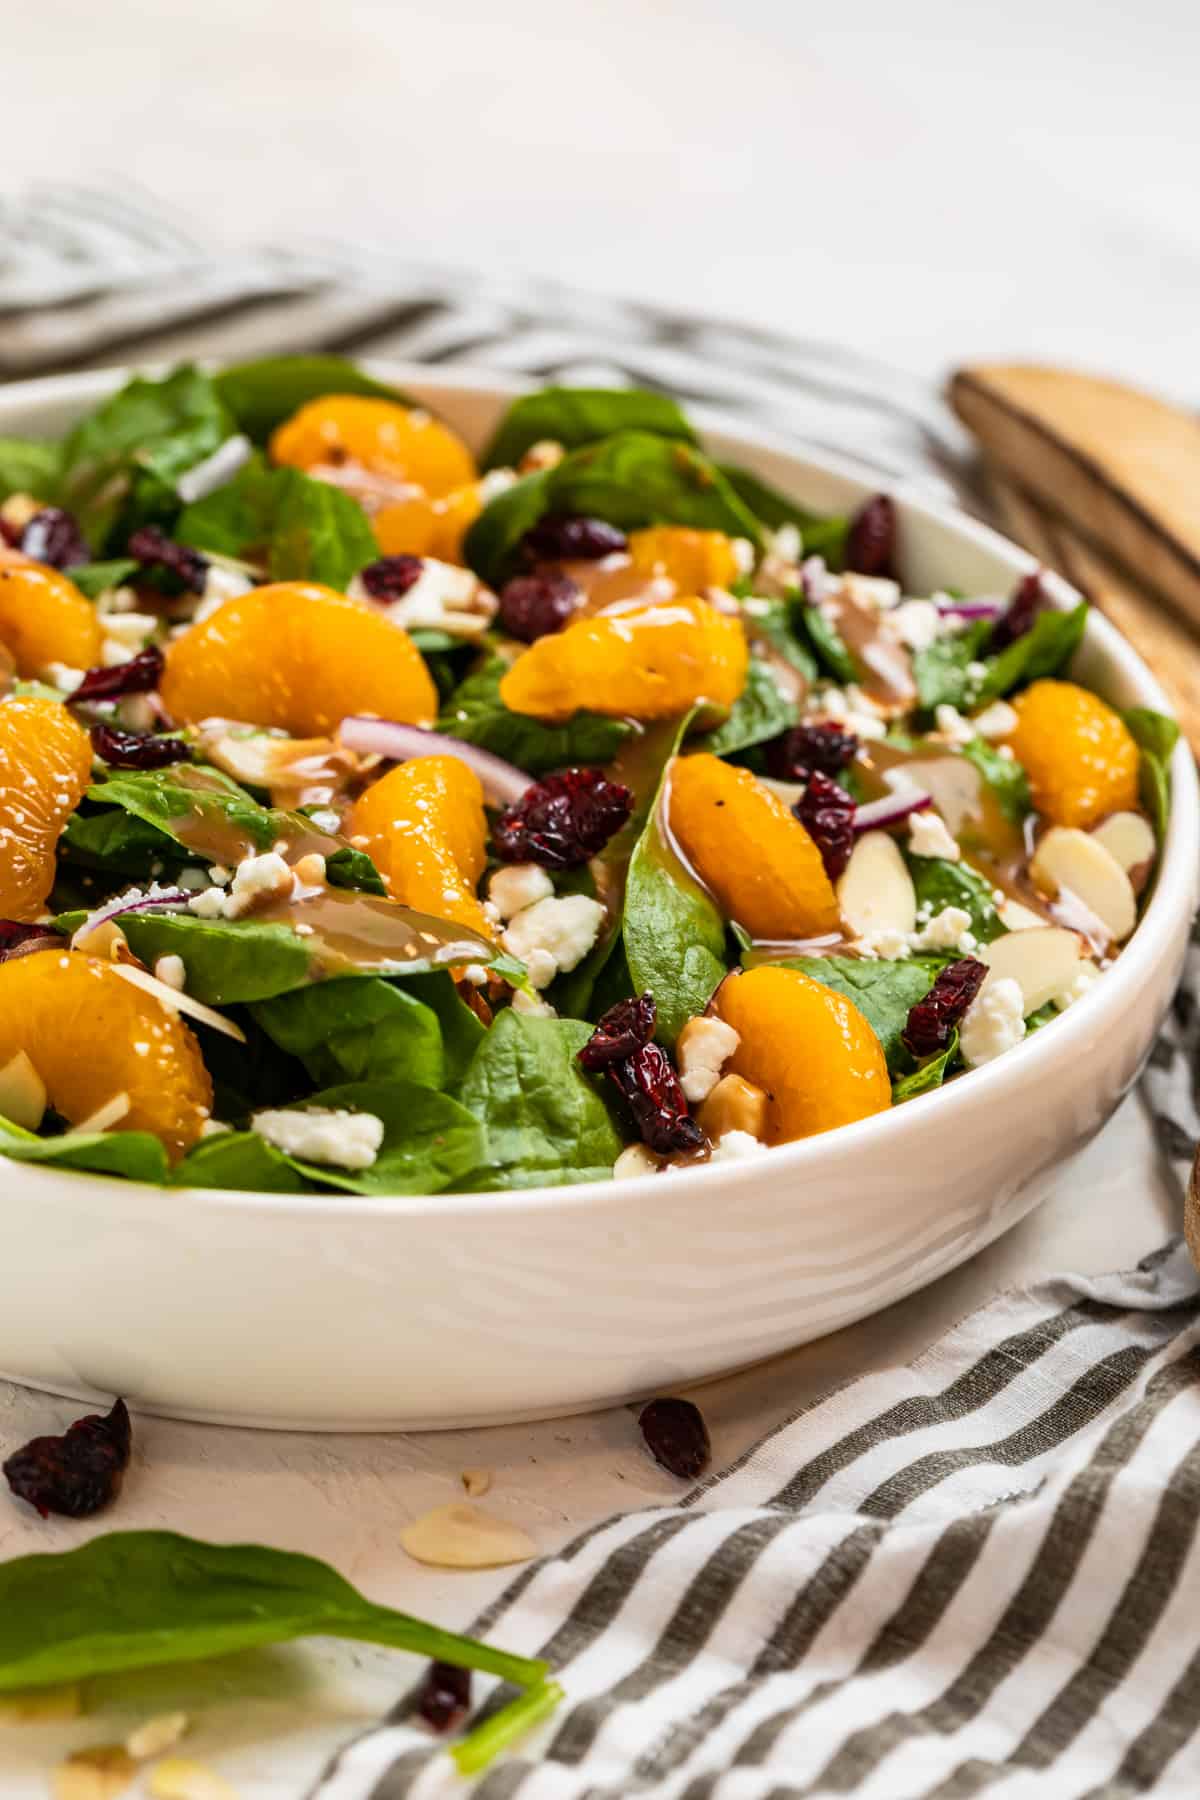 Spinach salad with mandarins, dried cranberries, toasted almonds, onion and goat cheese in white bowl.